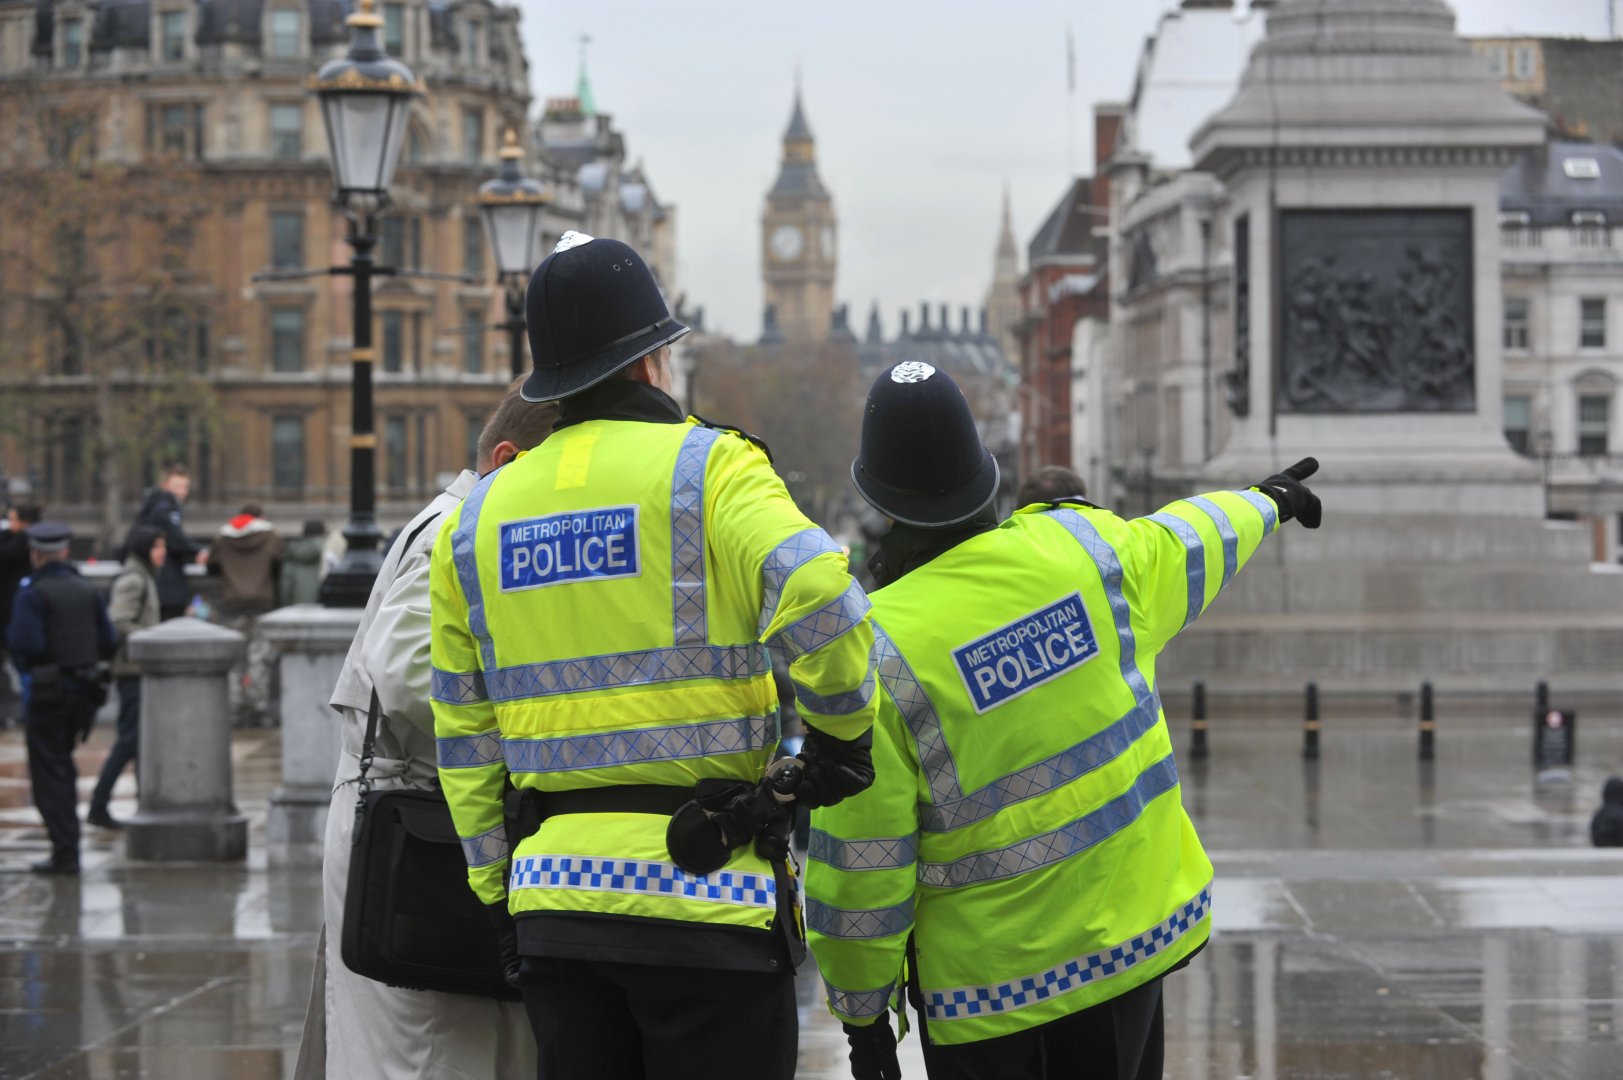 File image of two police officers giving a man directions in Trafalgar Square